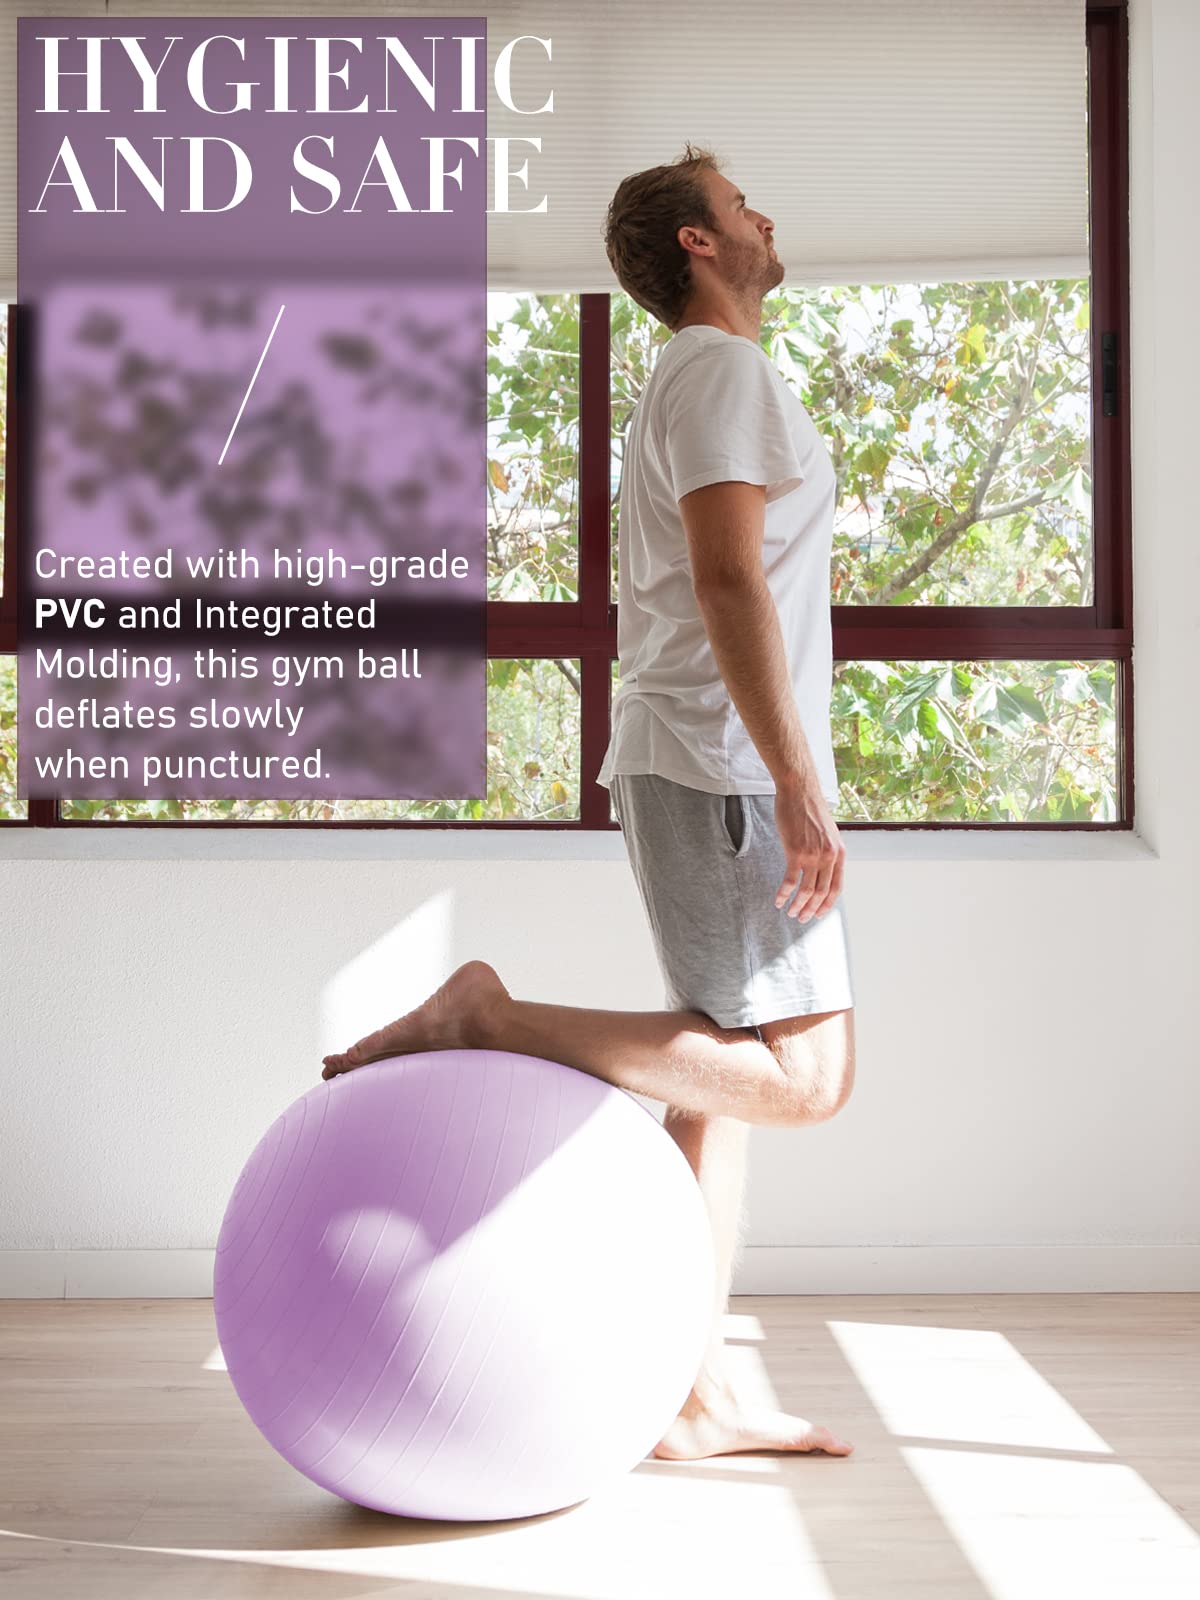 PhysKcal Gym Ball 65cm Purple Exercise Swiss Ball for Fitness Yoga Pilates Pregnancy, Anti Burst Ball Chair for Balance, Stability, Quick Pump Included